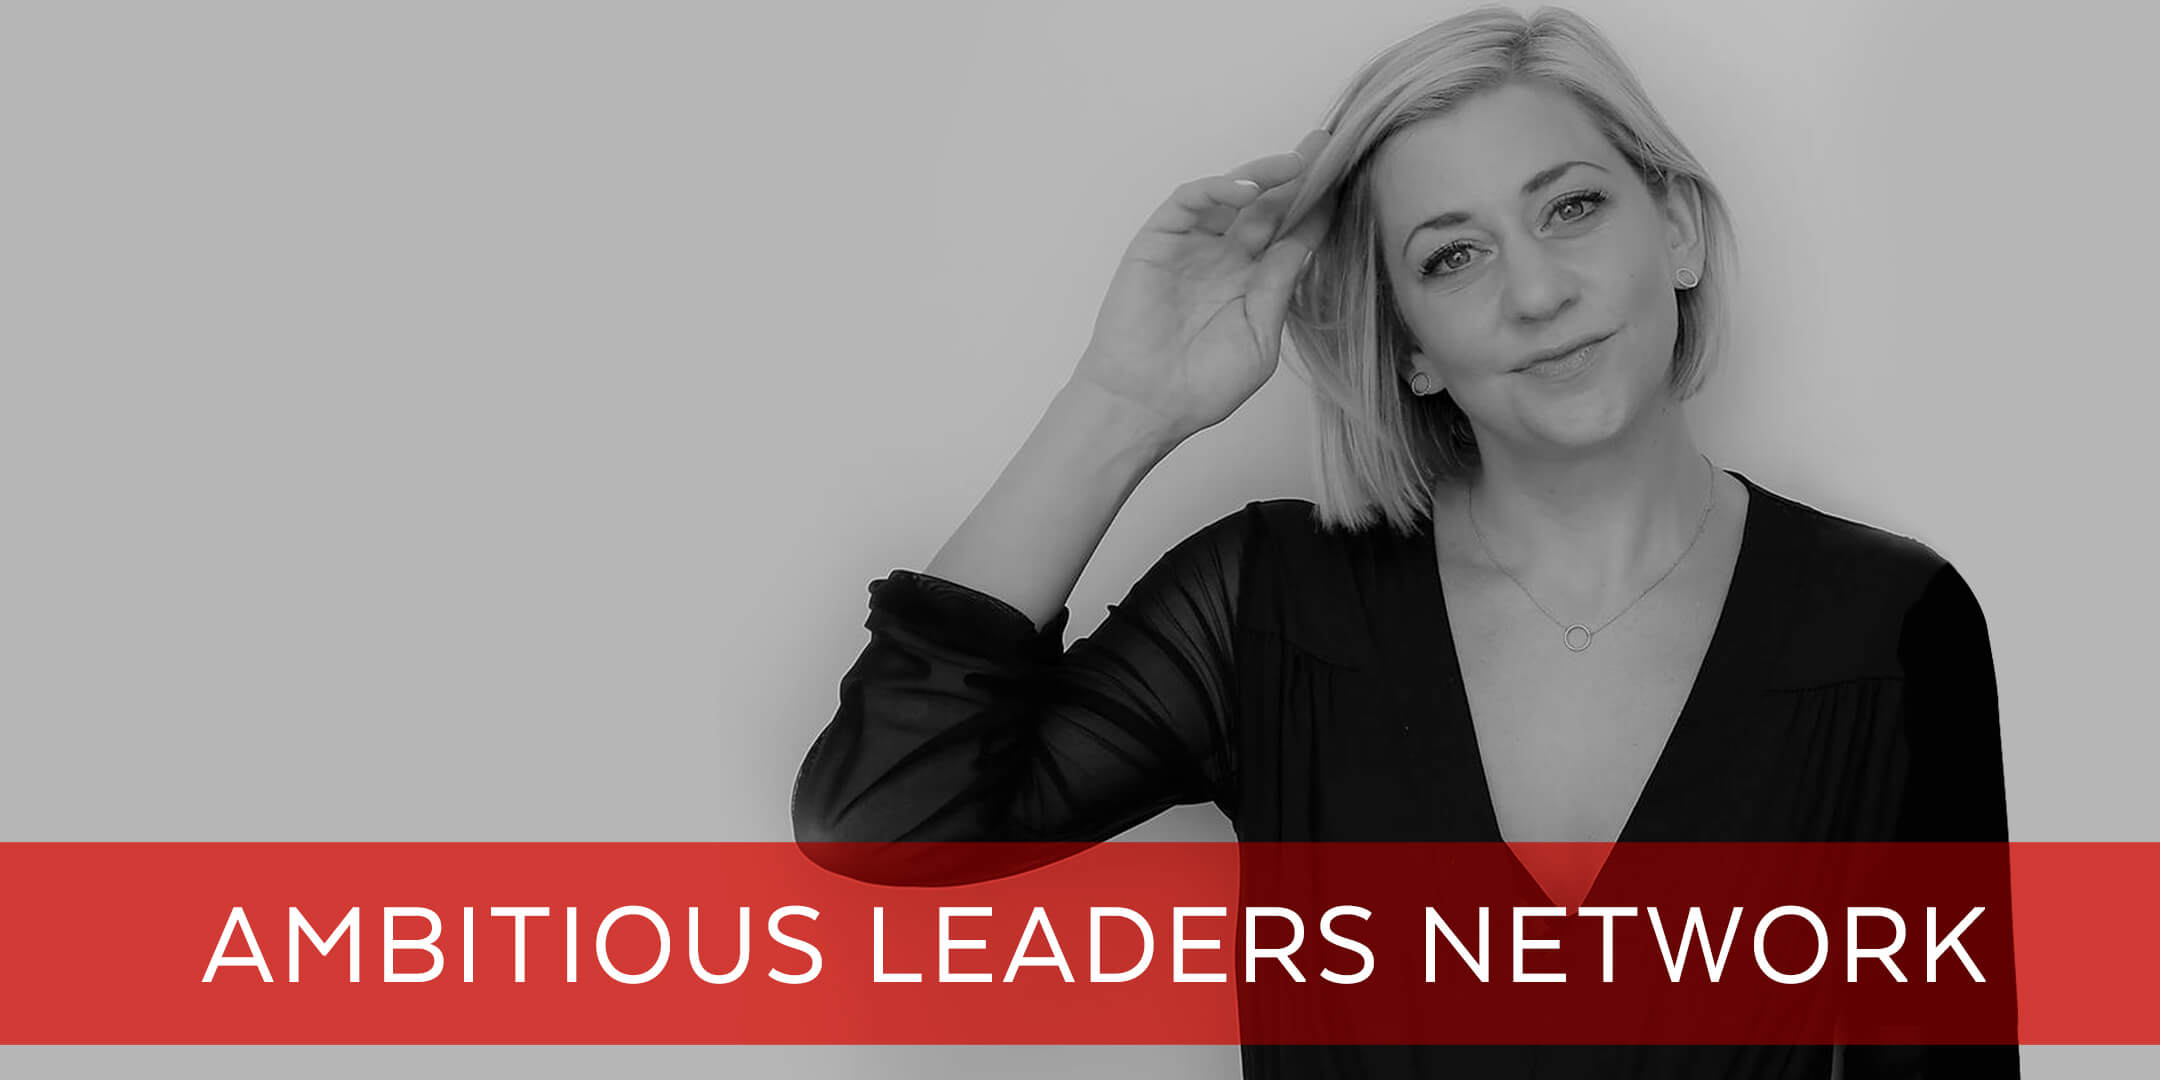 Emily Chadbourne - Speaker At The Ambitious Leaders Network